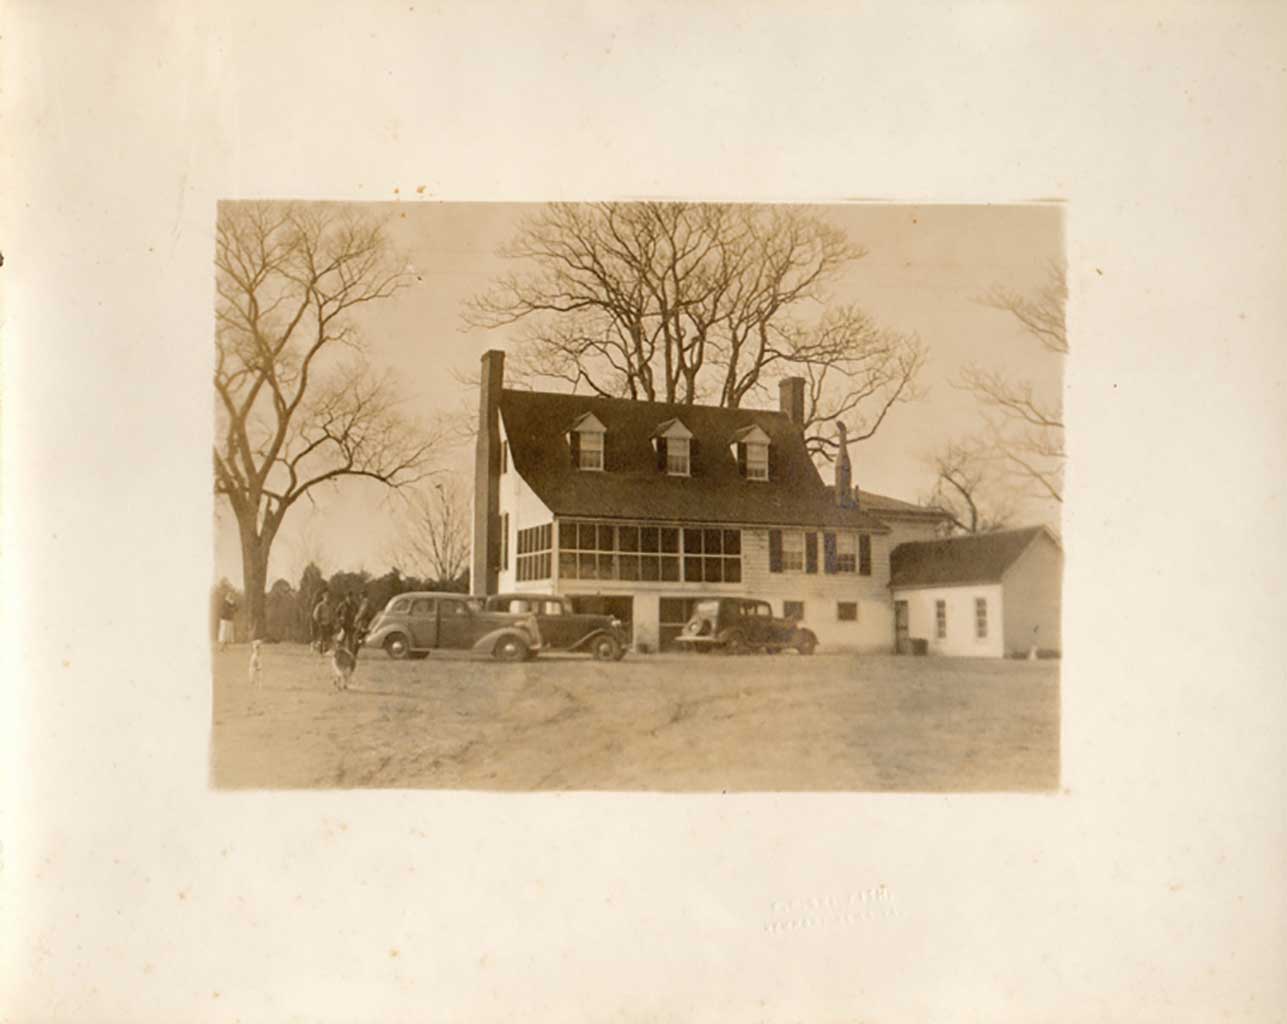 hall-duff-house-from-the-rear-circa-1938-img079